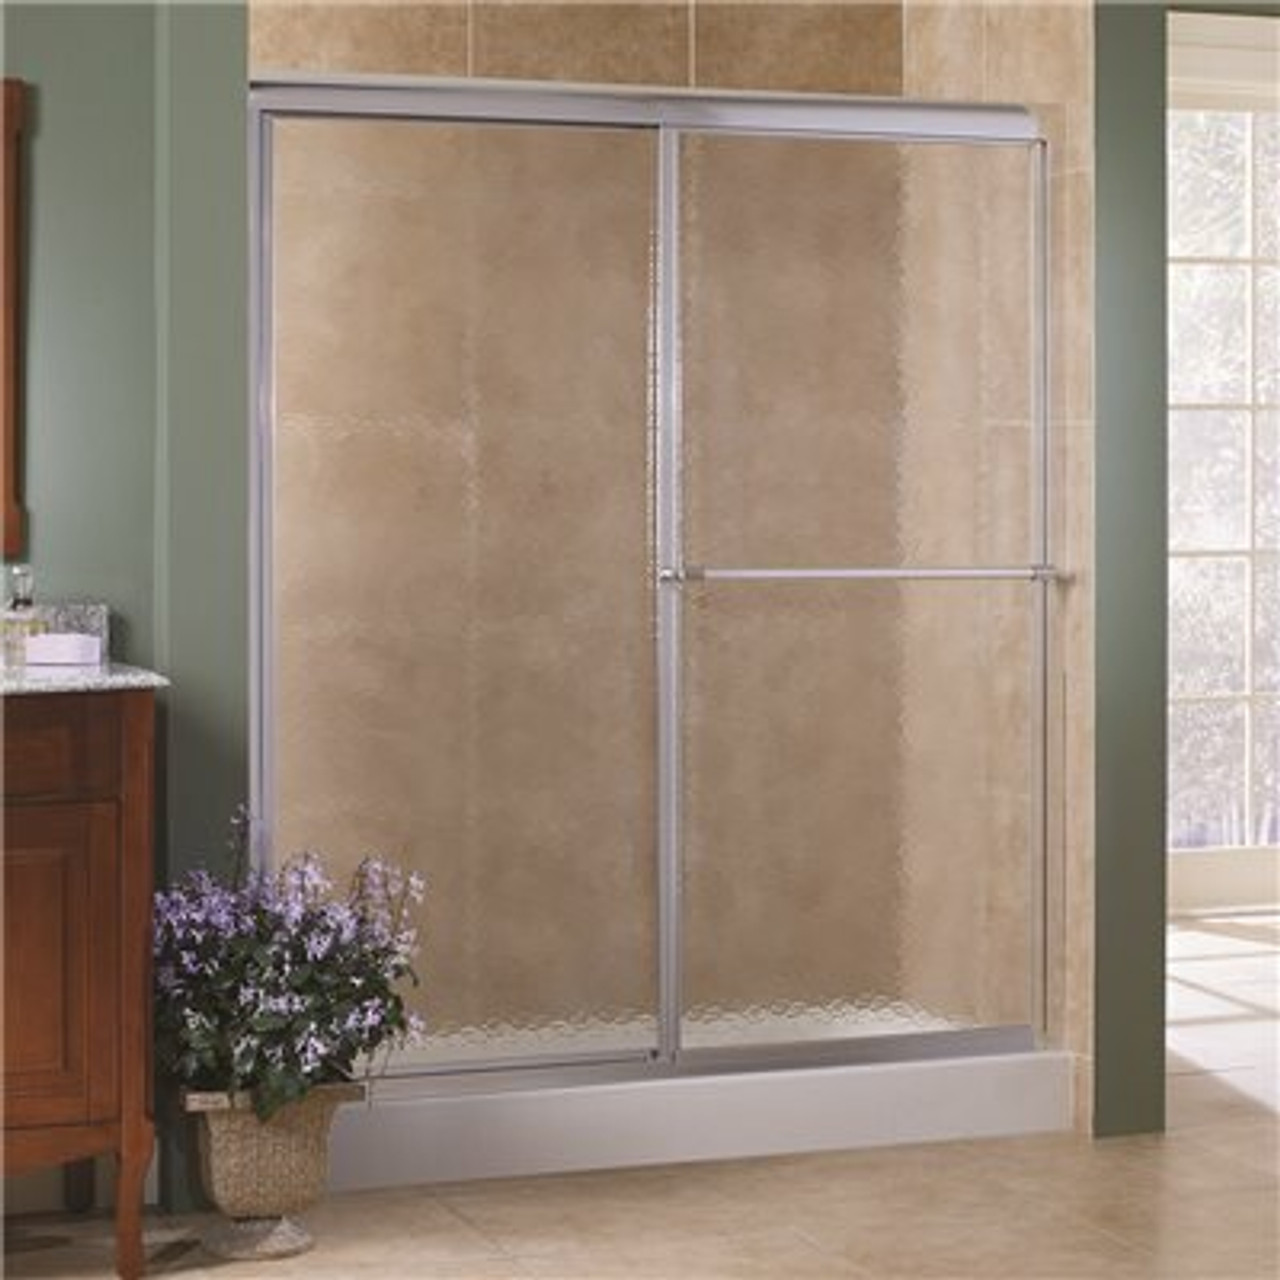 Foremost Tides 44 In. To 48 In. X 70 In. H Framed Sliding Shower Door In Silver And Obscure Glass Without Handle